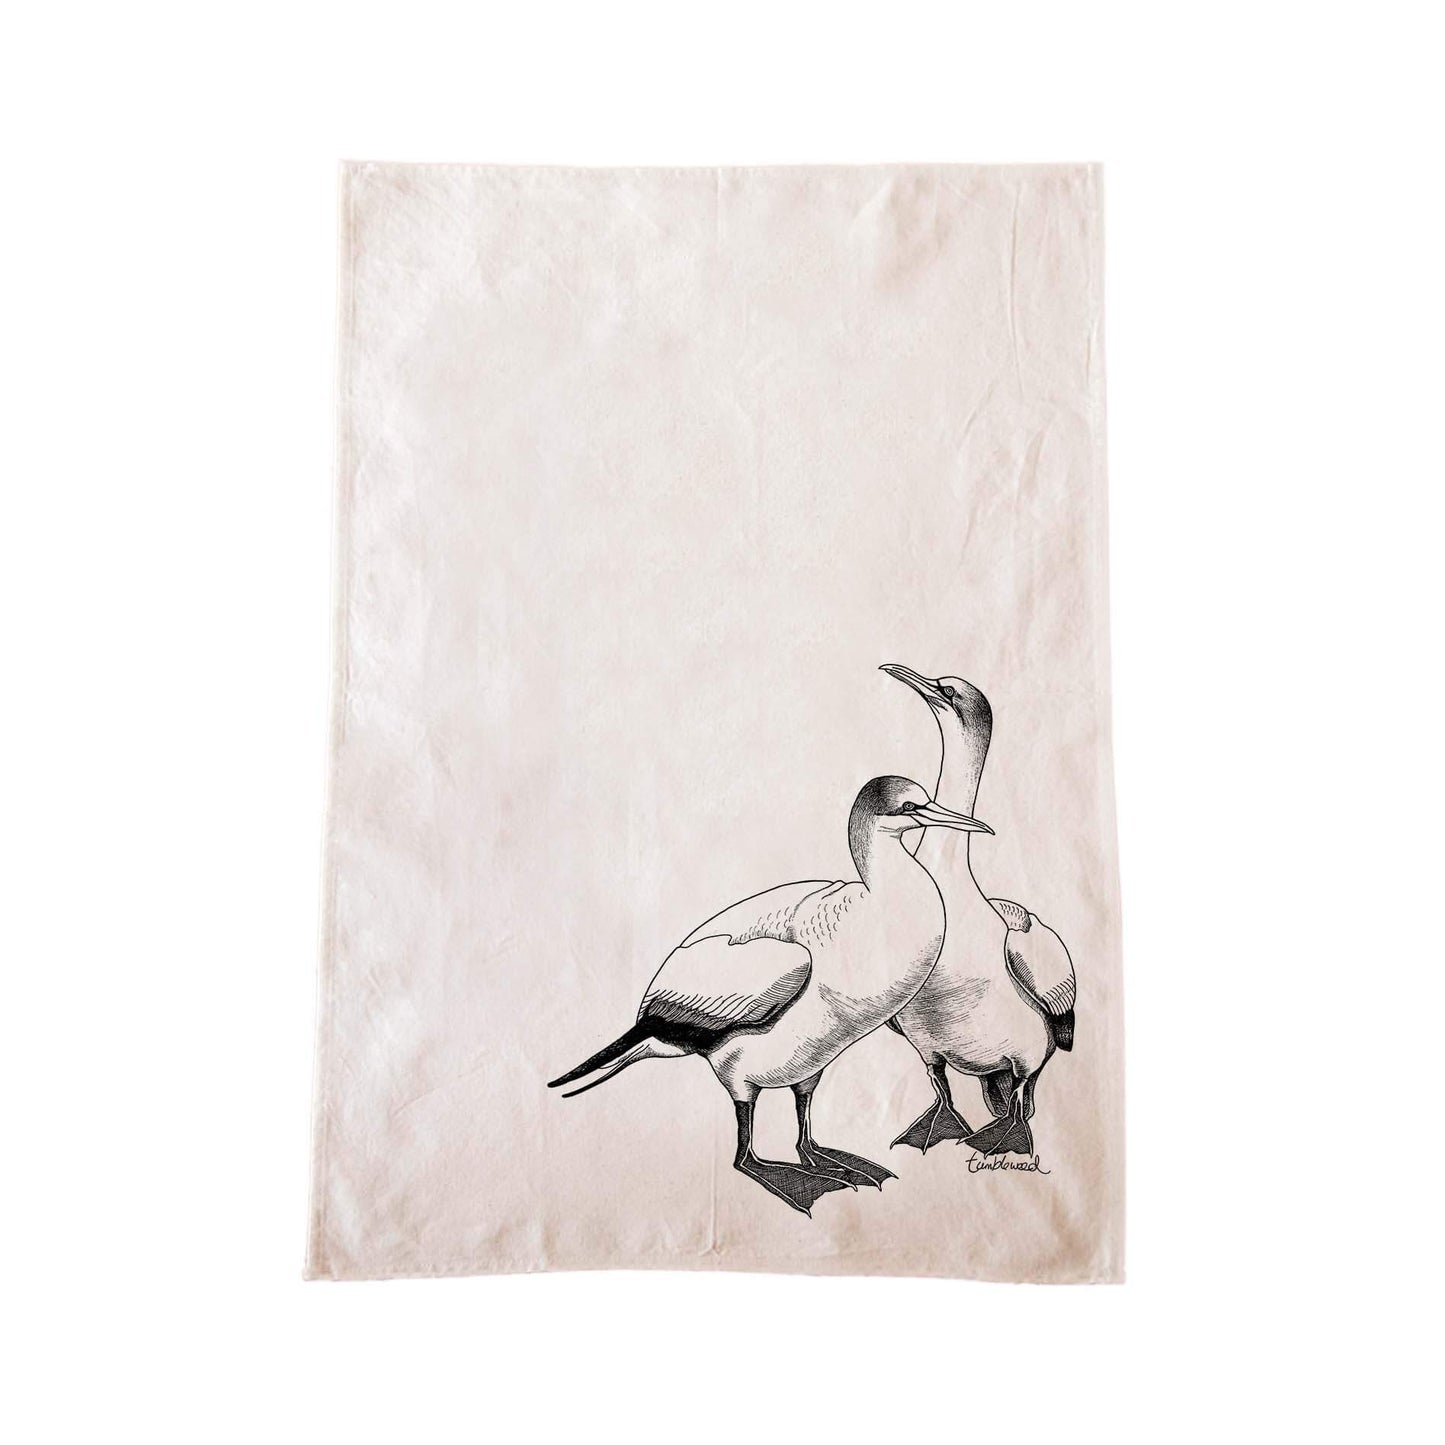 Off-white cotton tea towel with a screen printed Gannet design.